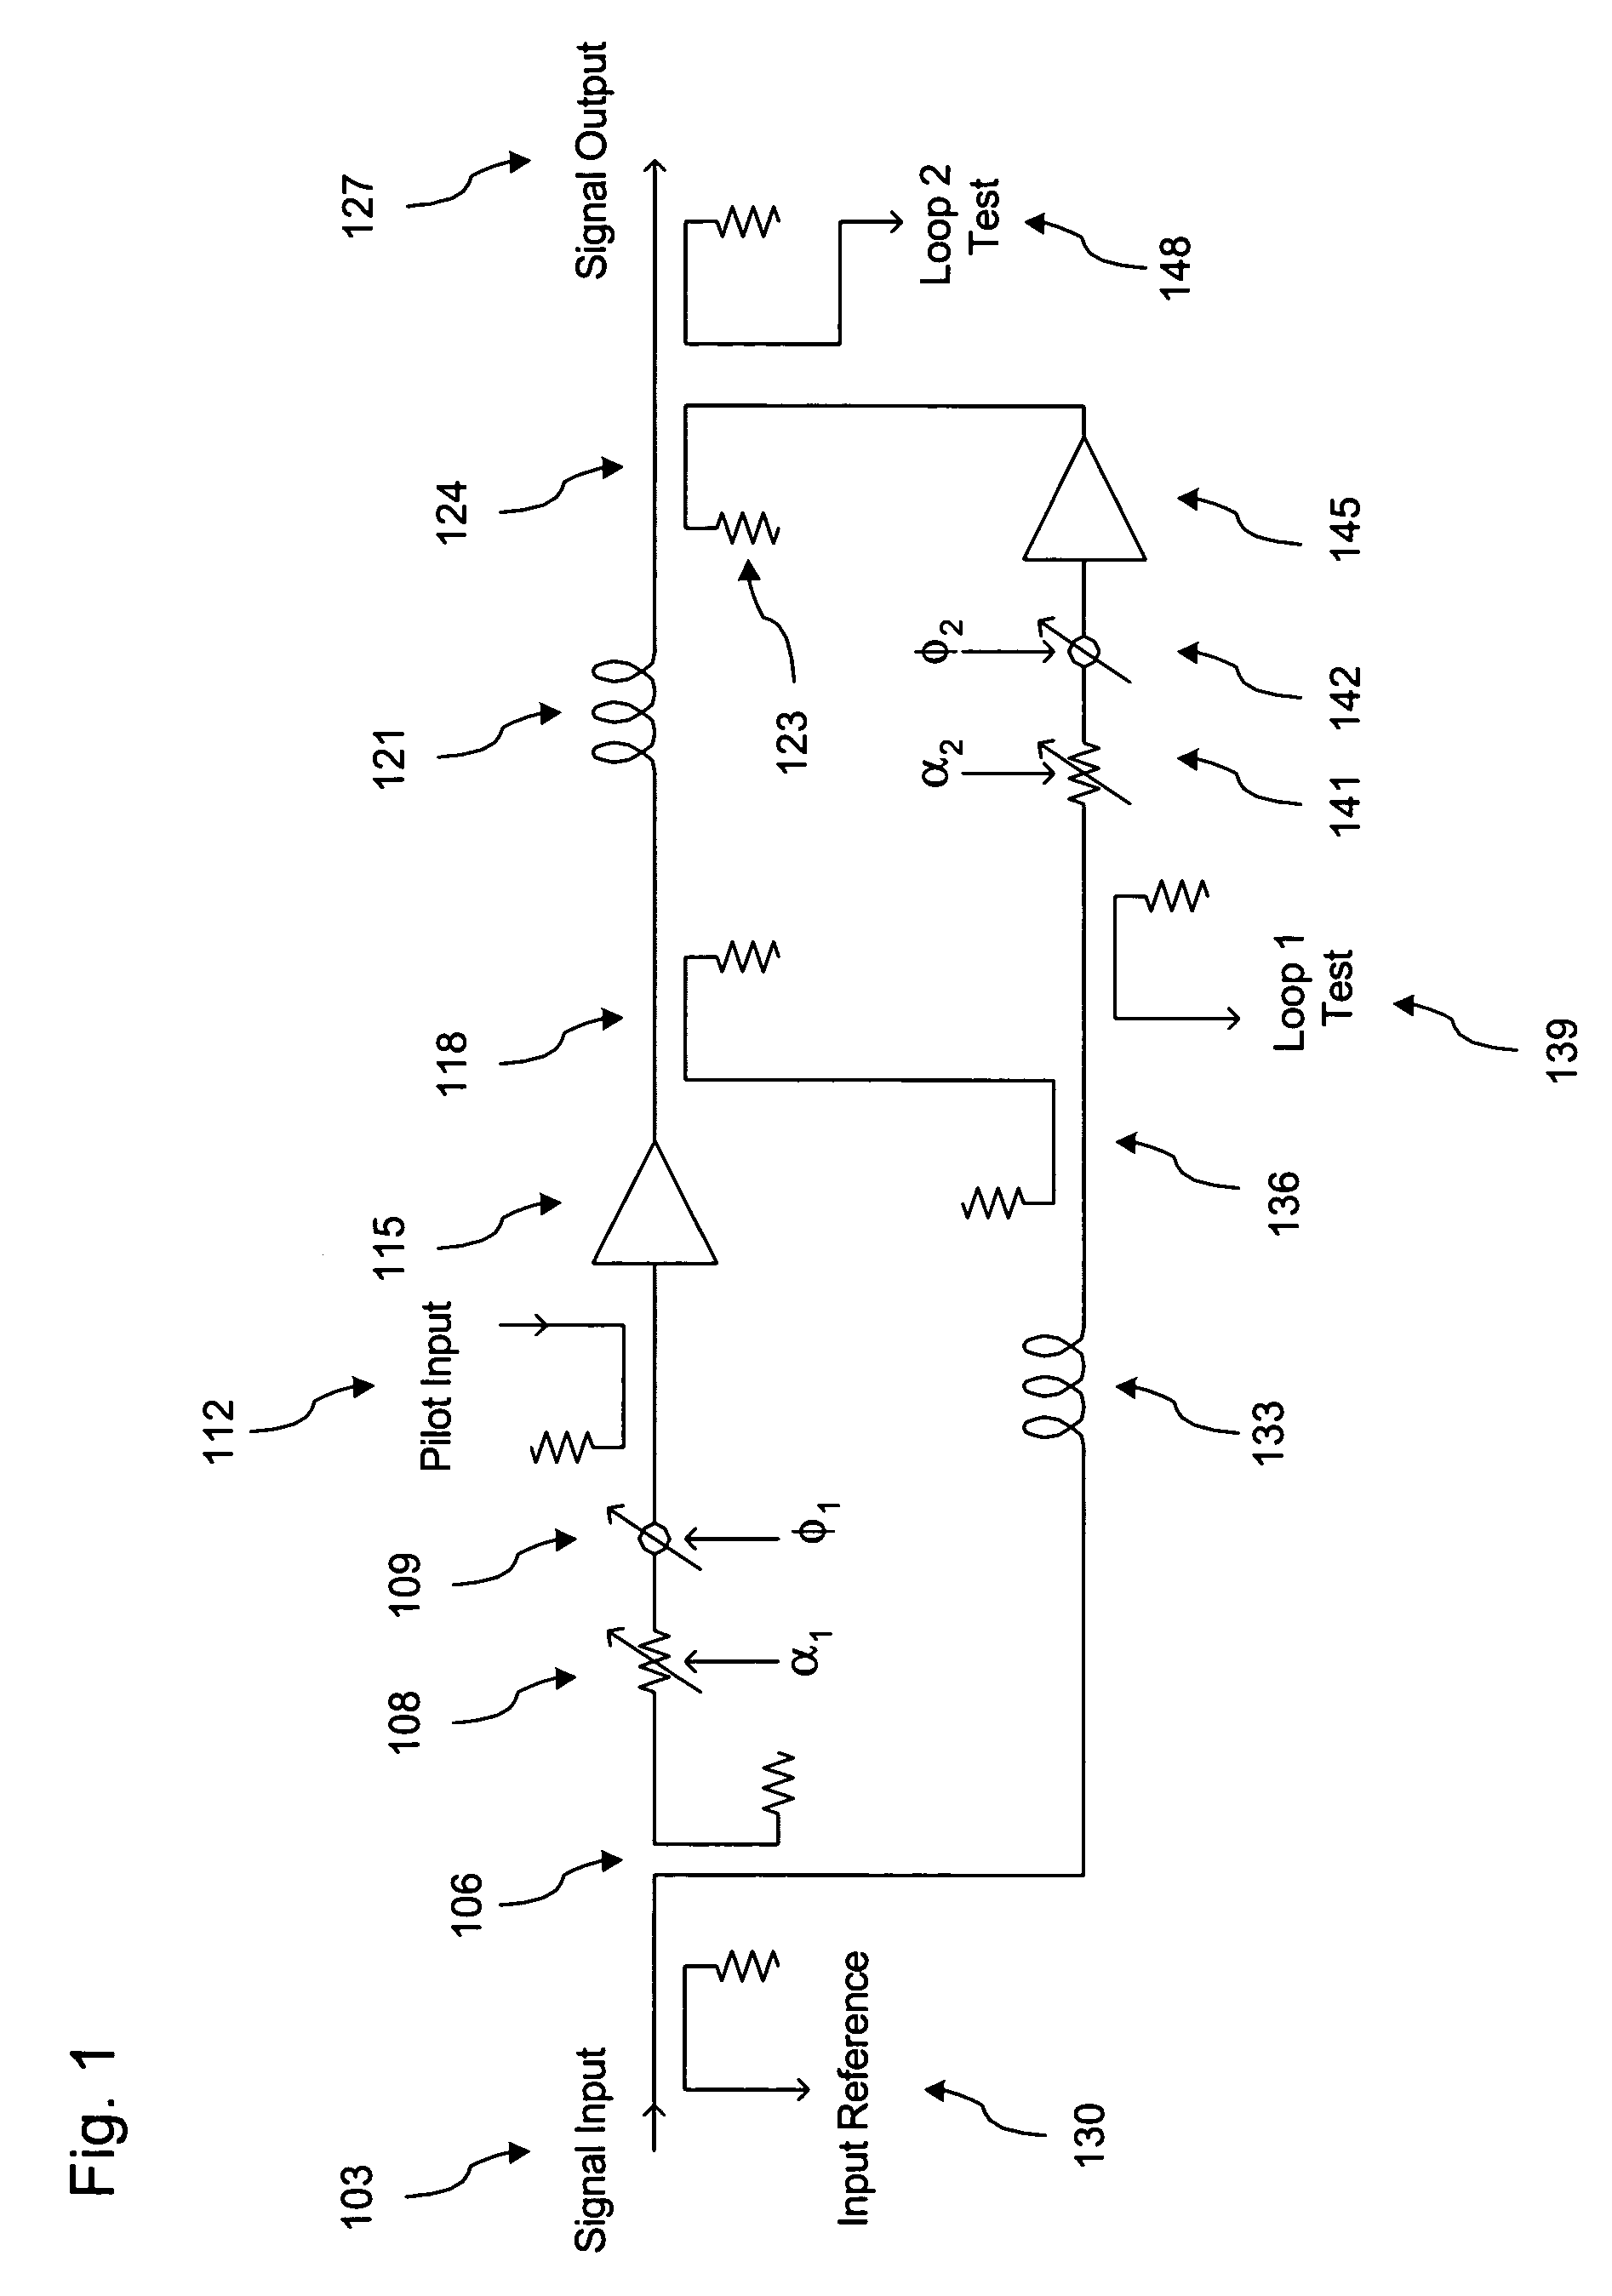 Feed forward amplifier system using penalties and floors for optimal control